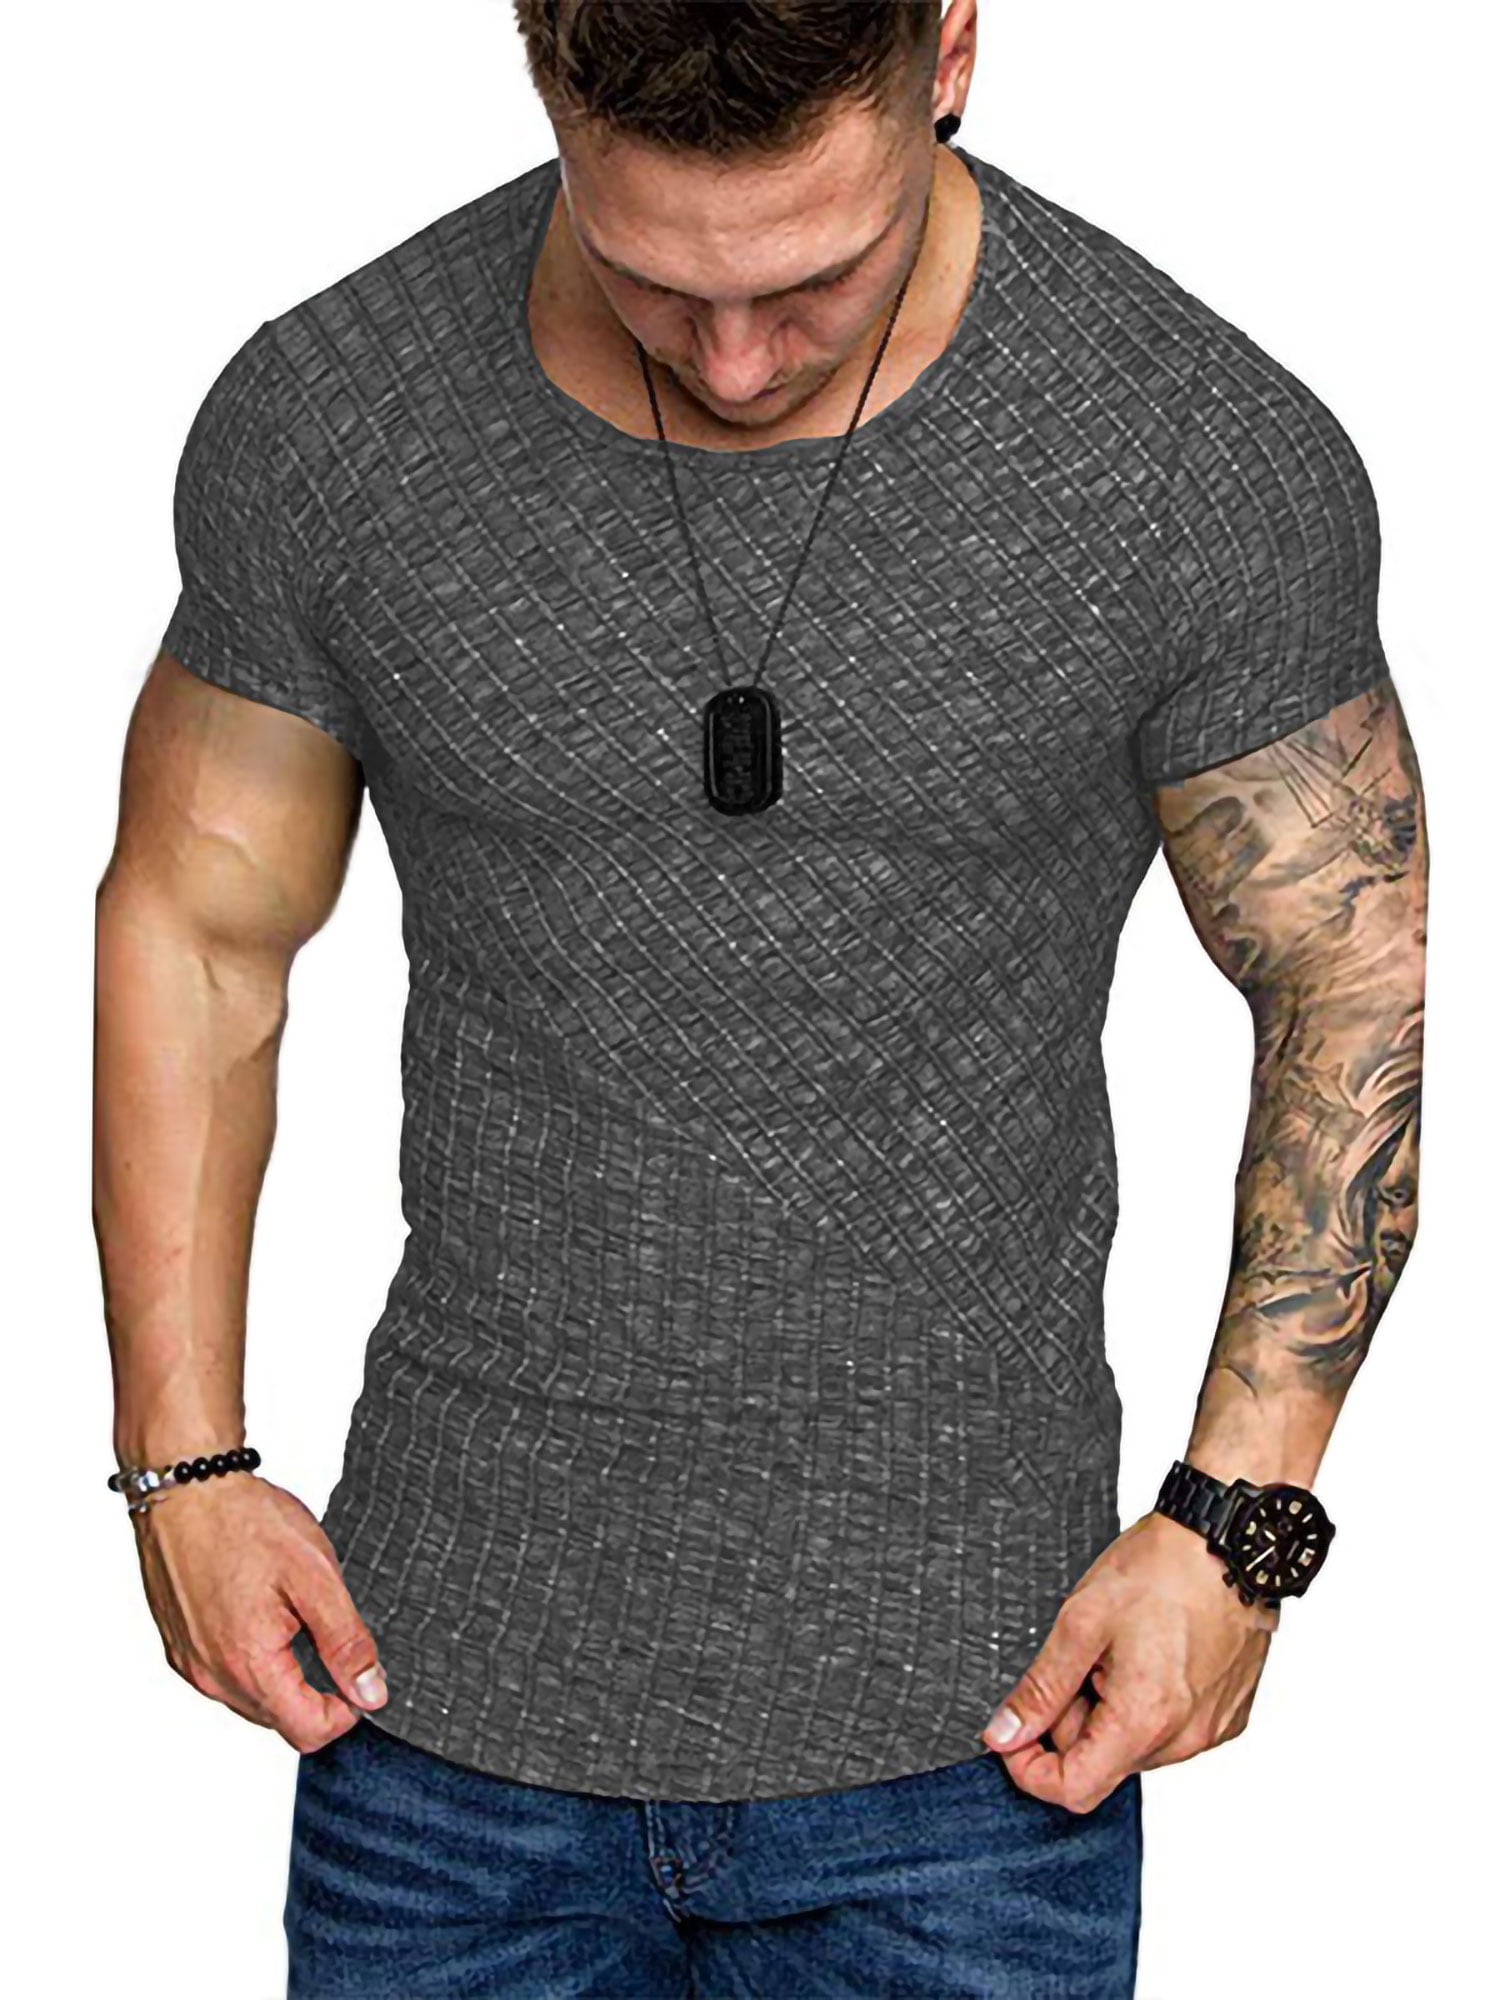 Men's Solid Color Ribbed Crew Neck Muscle Tees Perfect for Workouts Gym ...